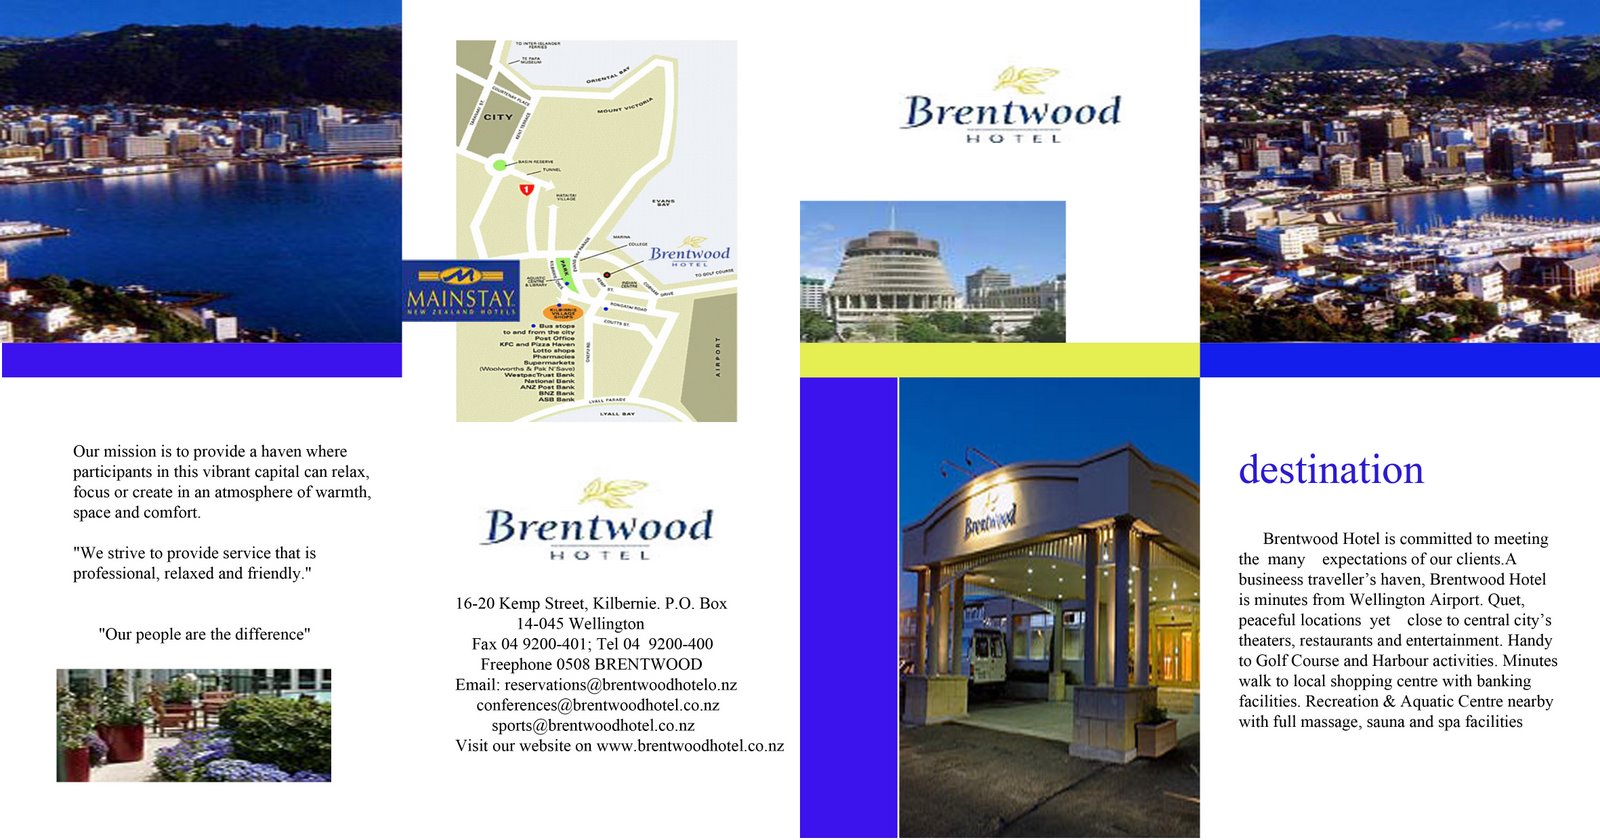 [brentwoodfront+copy.jpg]